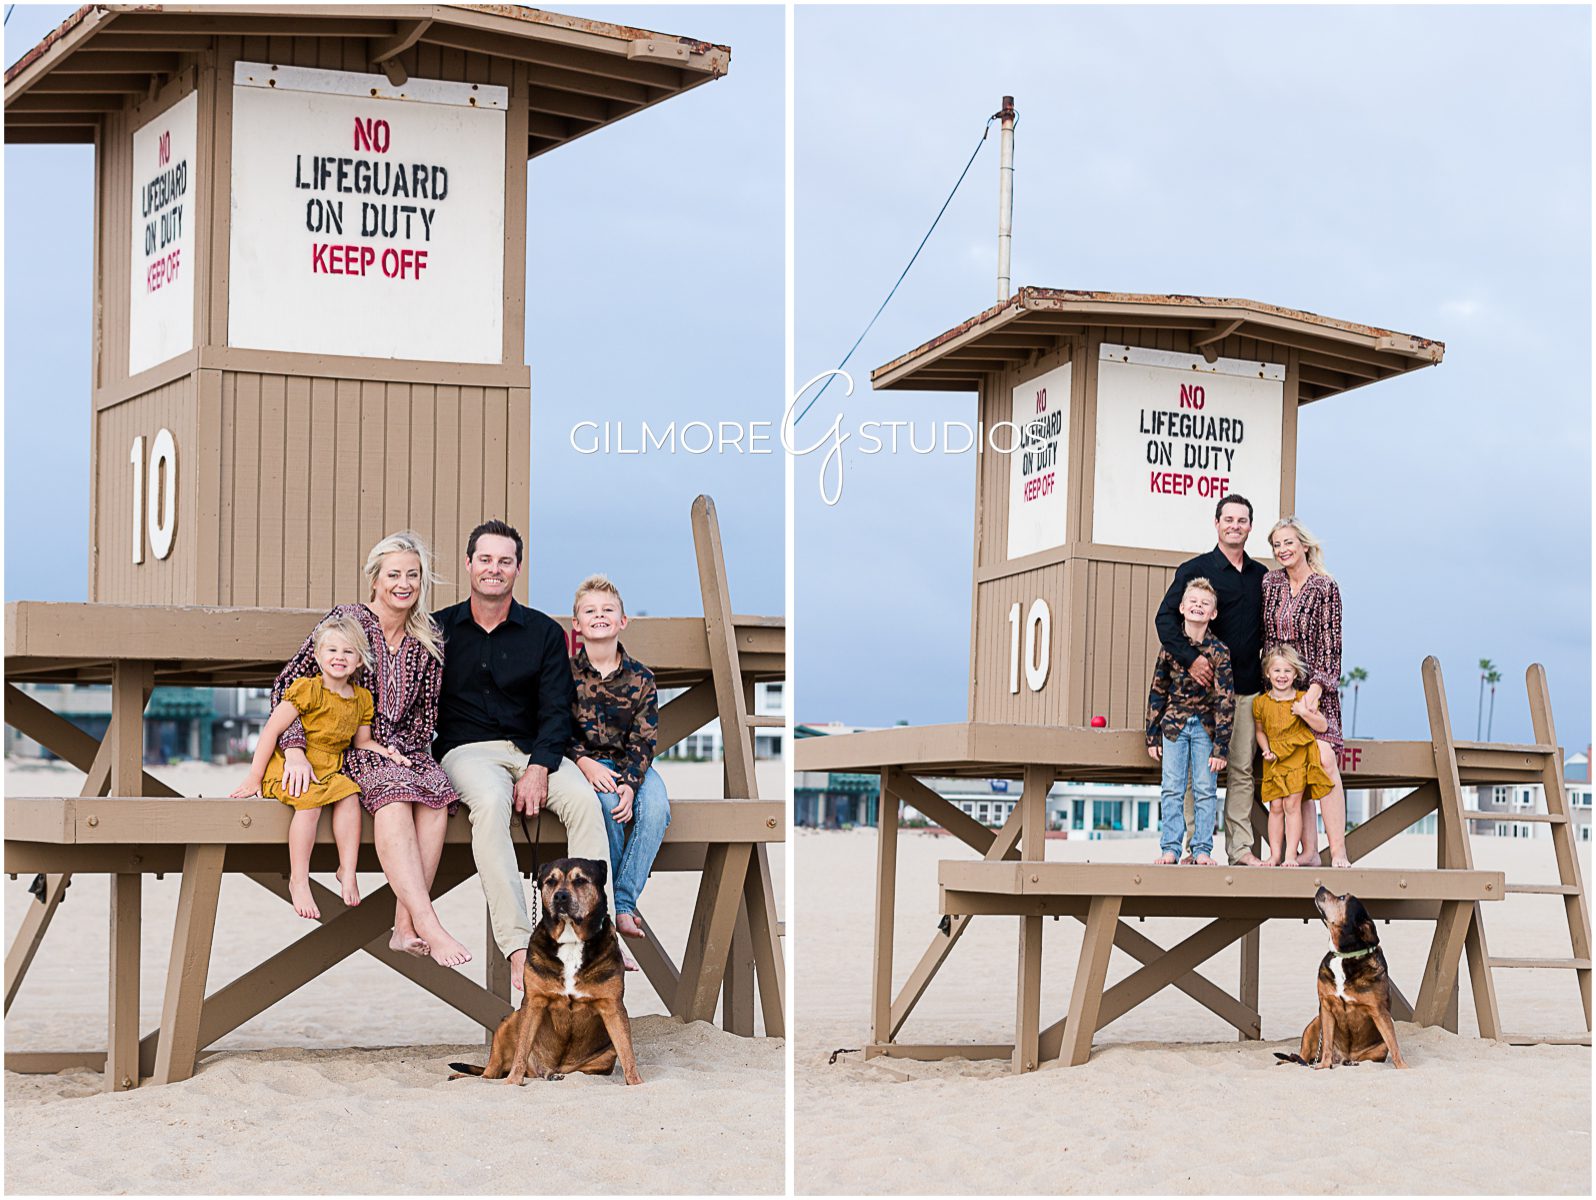 Orange County family photographers, Family Photos at the Beach, Newport, Orange County, portrait session, lifeguard tower, dog, kids, children